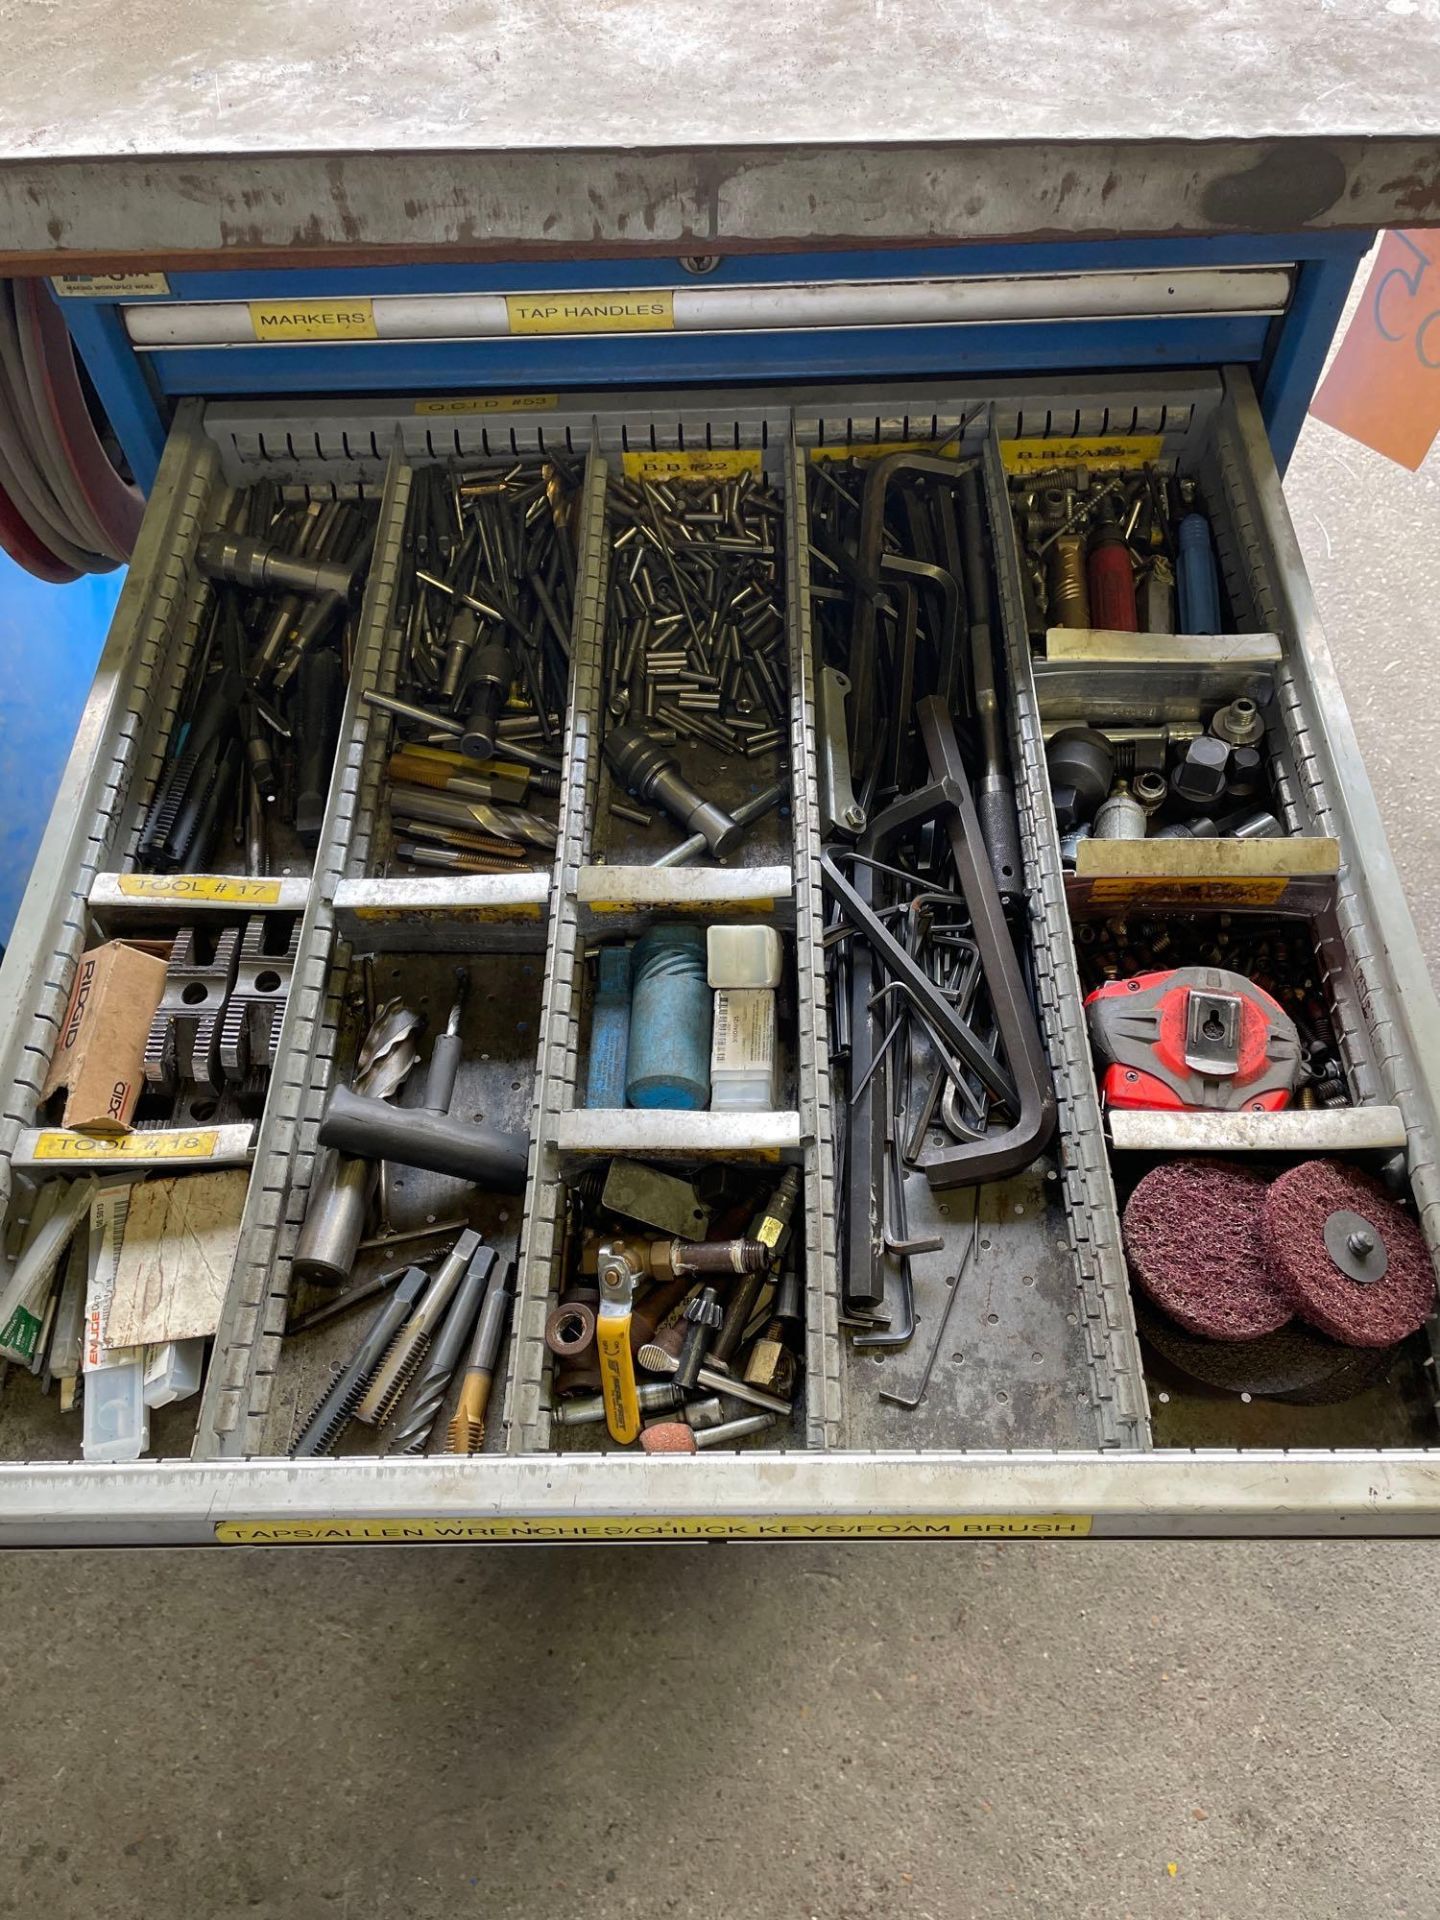 12 Drawer Work Table with Air Hose Reel on Base, with miscellaneous hand tools, taps, drill bits, Al - Image 19 of 32